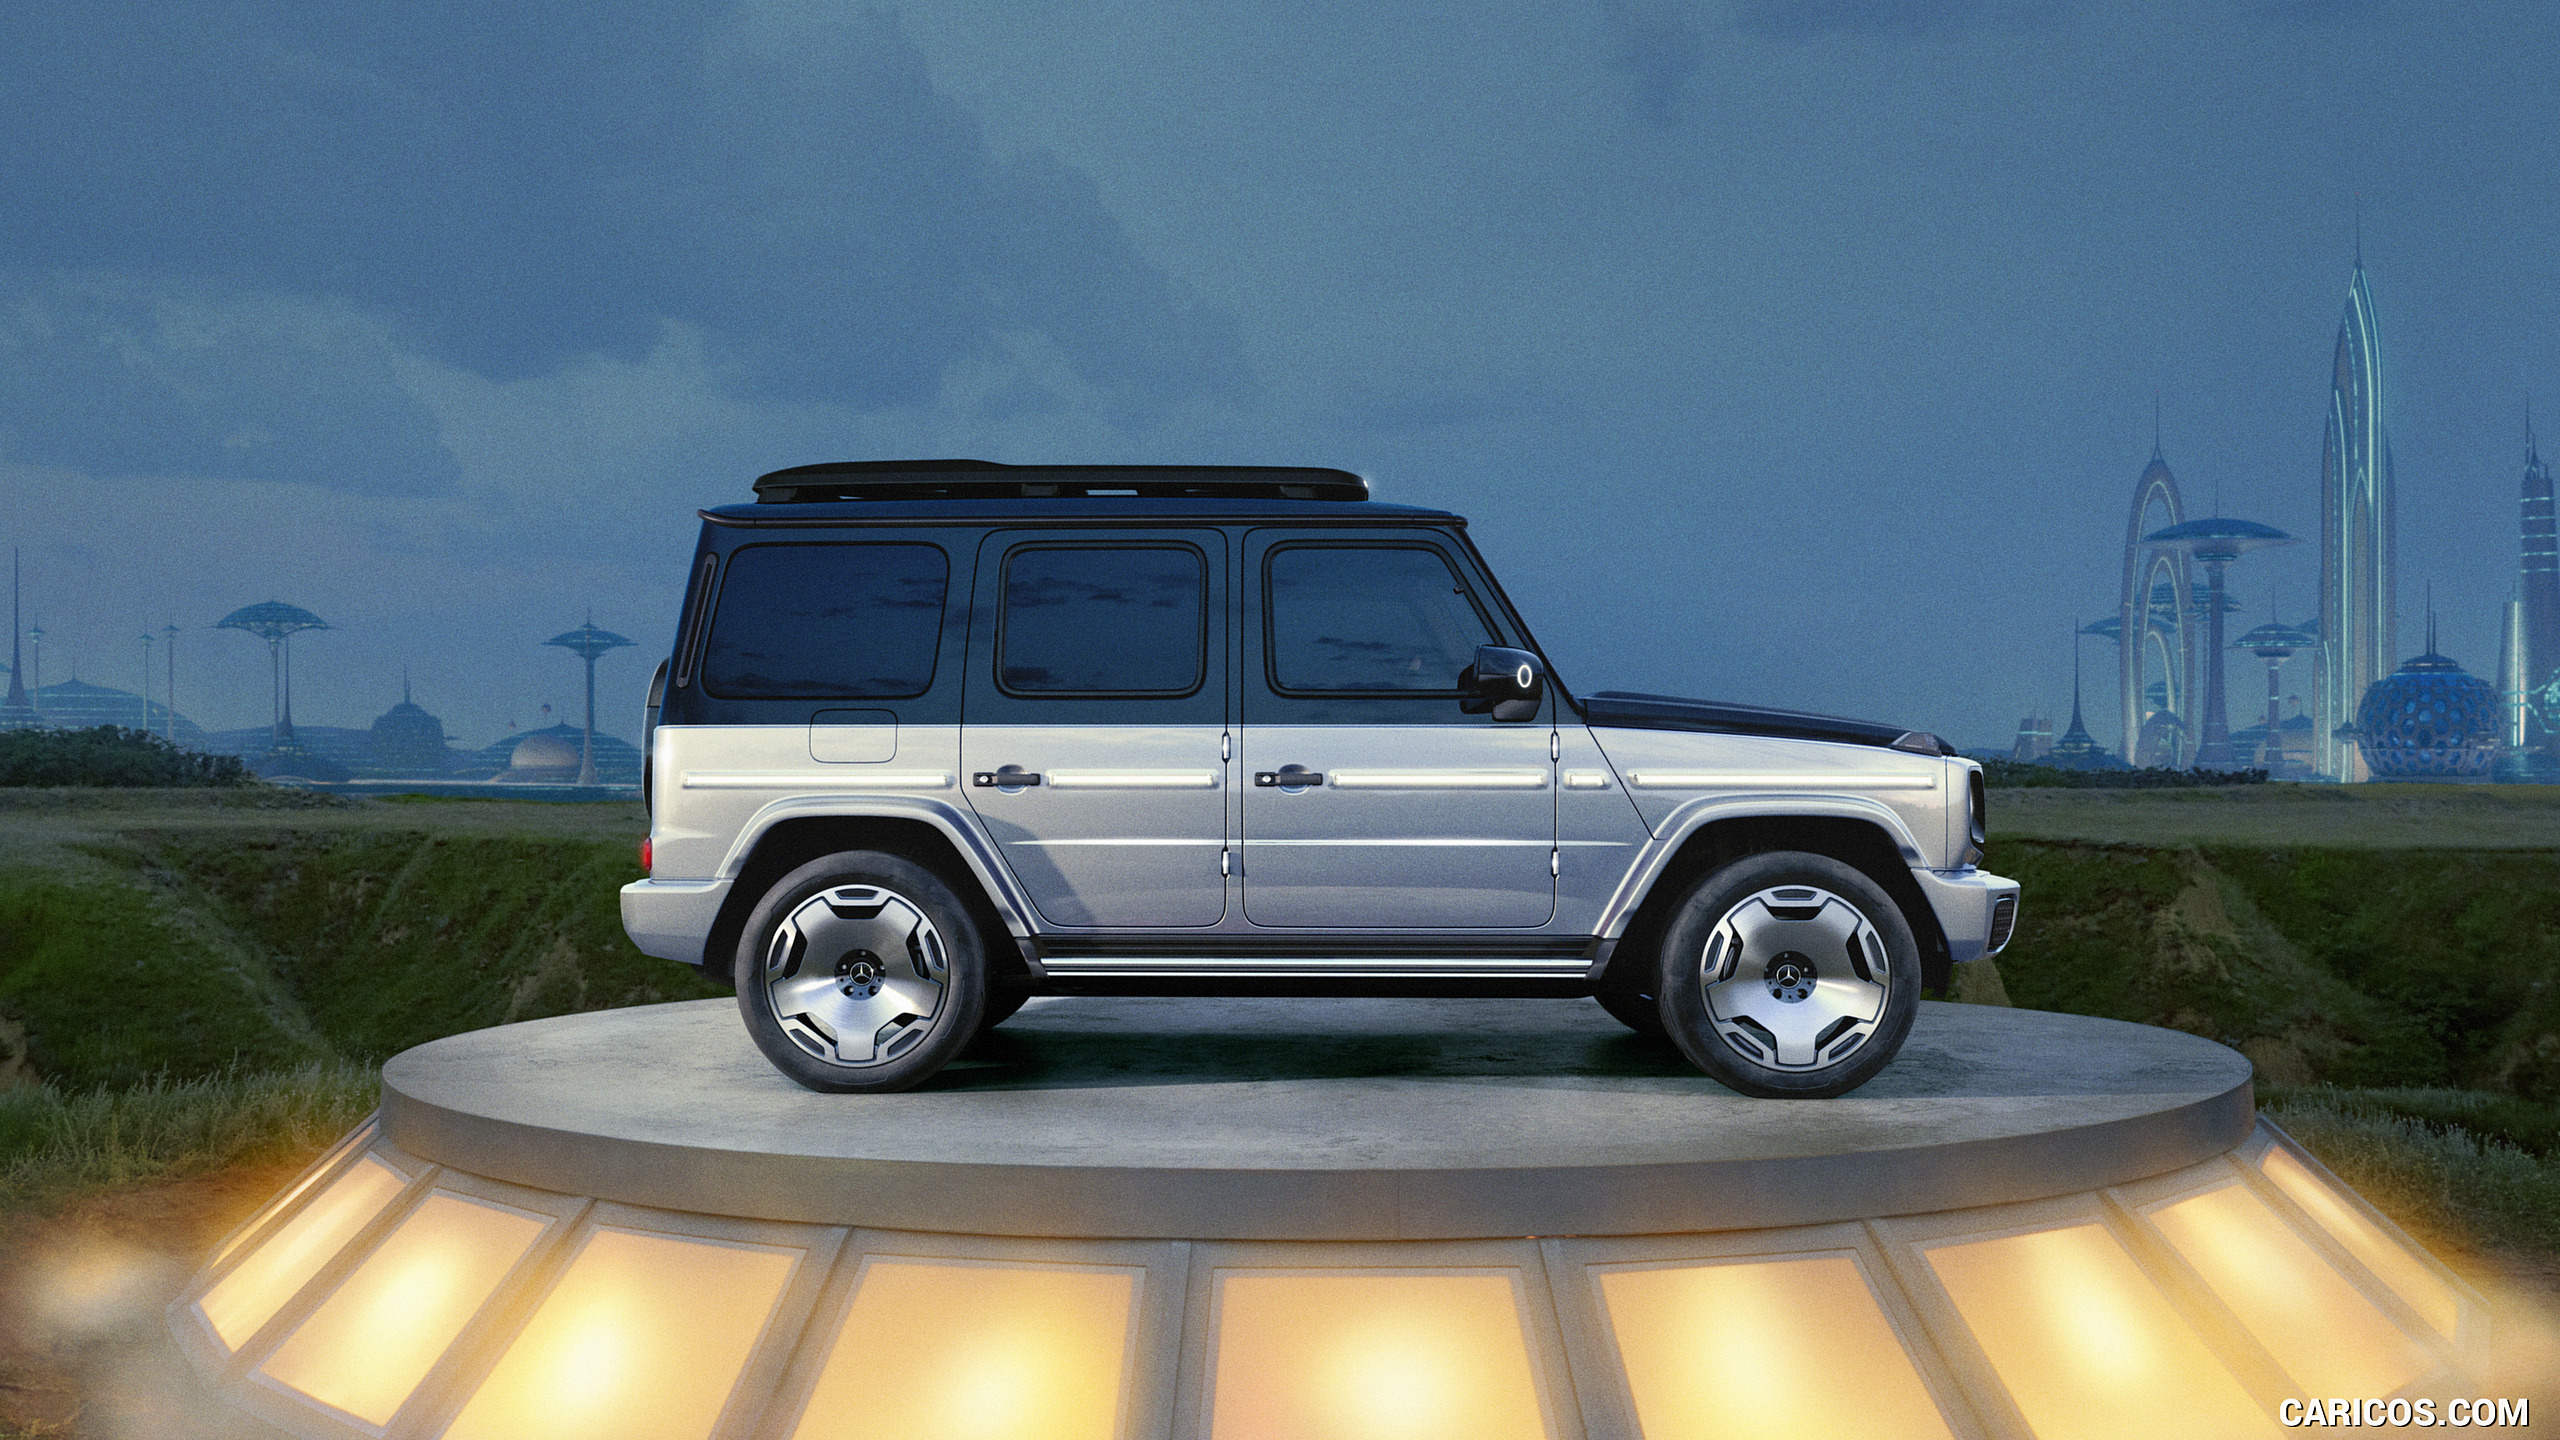 2021 Mercedes-Benz EQG Electric G-Class Concept - Side, #17 of 19